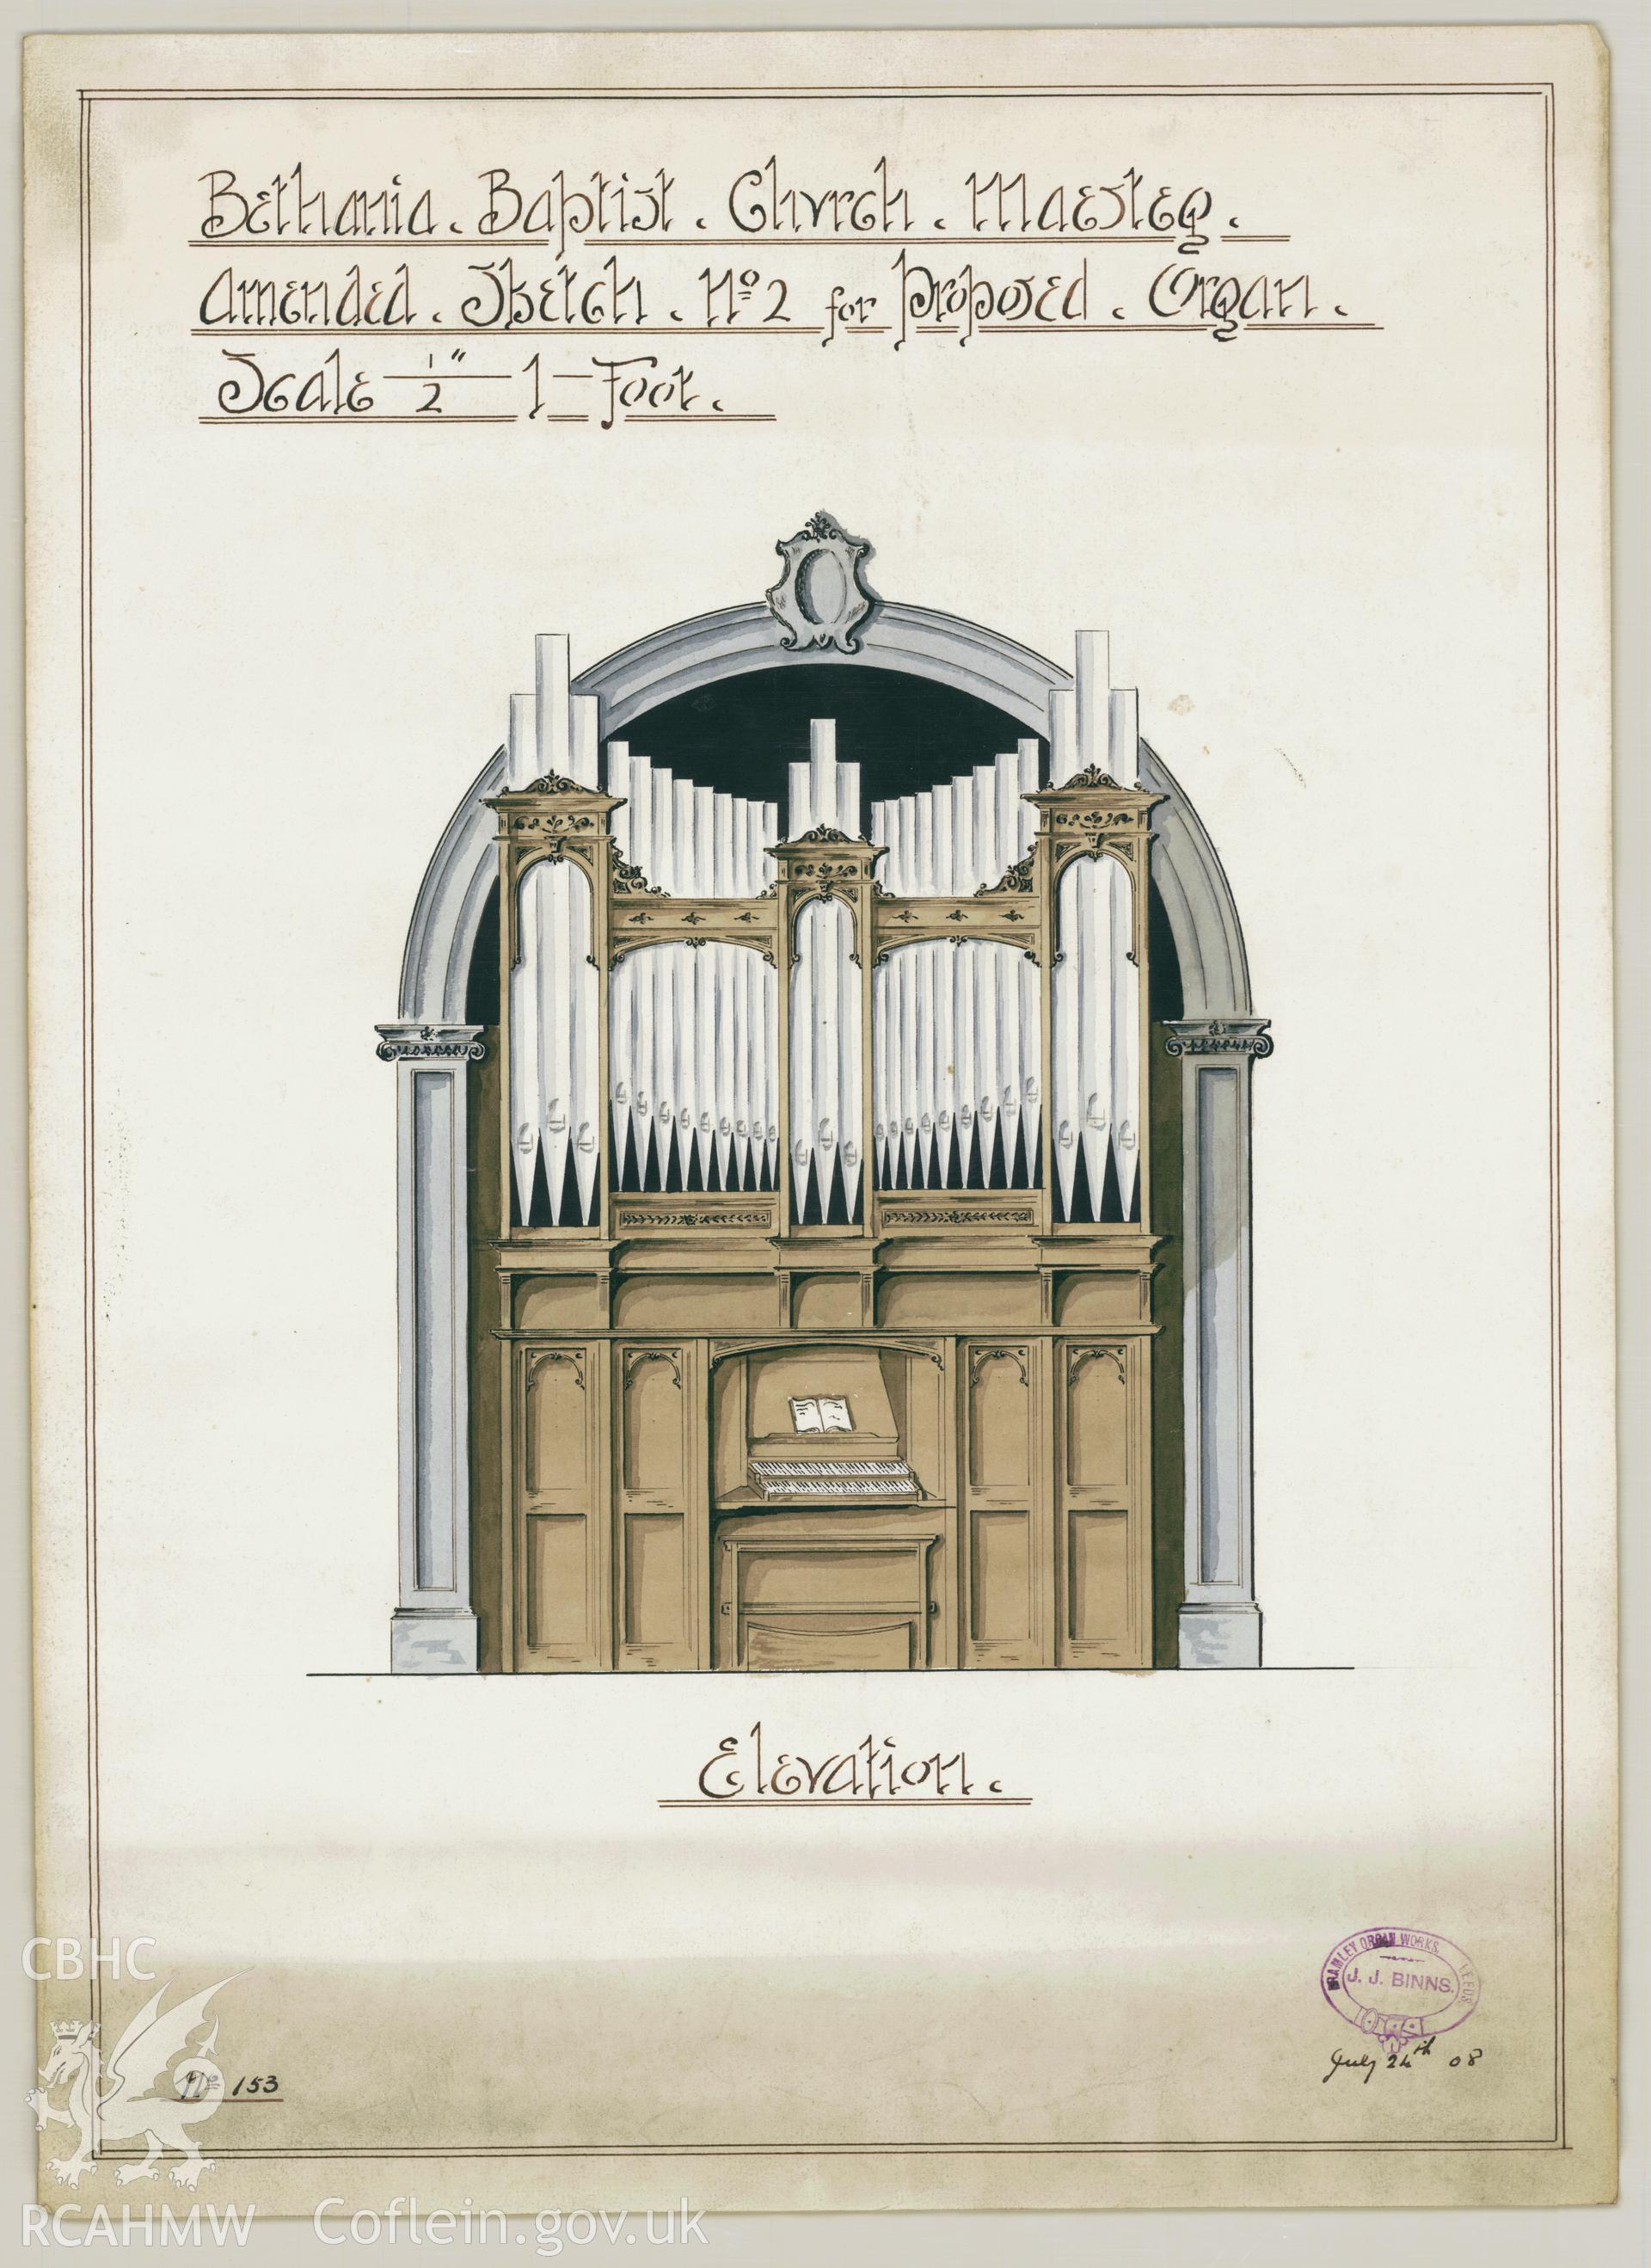 Digitized copy of a coloured drawing showing the proposed organ at Bethania Chapel, Maesteg. Part of a collection of material relating to Bethania Chapel, Maesteg, loaned for copying by the Welsh Religious Buildings Trust. The original collection is held by the Glamorgan Record Office.